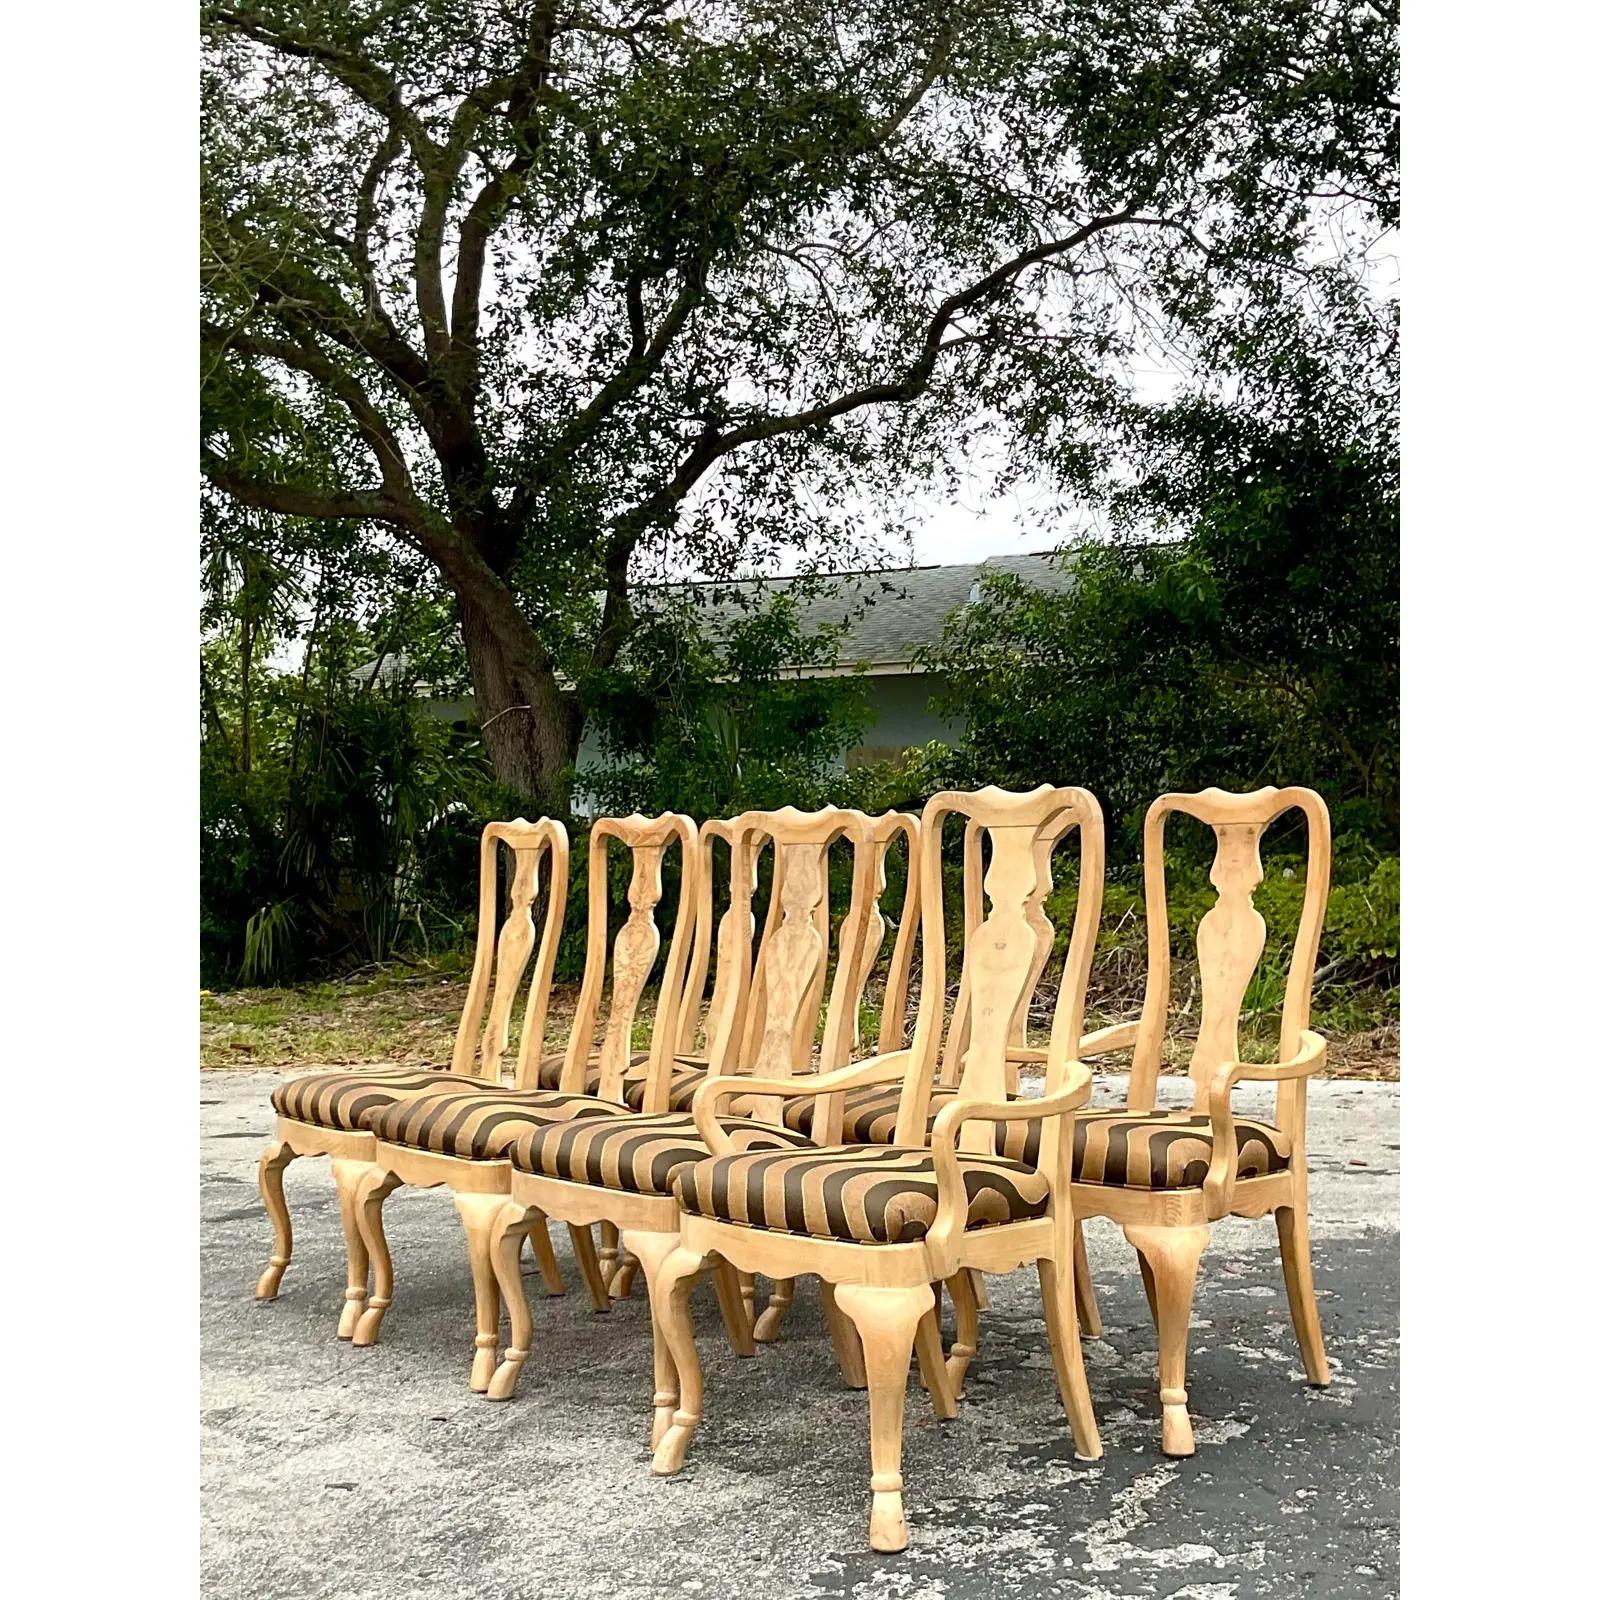 North American Vintage Regency Burl Wood Dining Chairs - Set of 8 For Sale